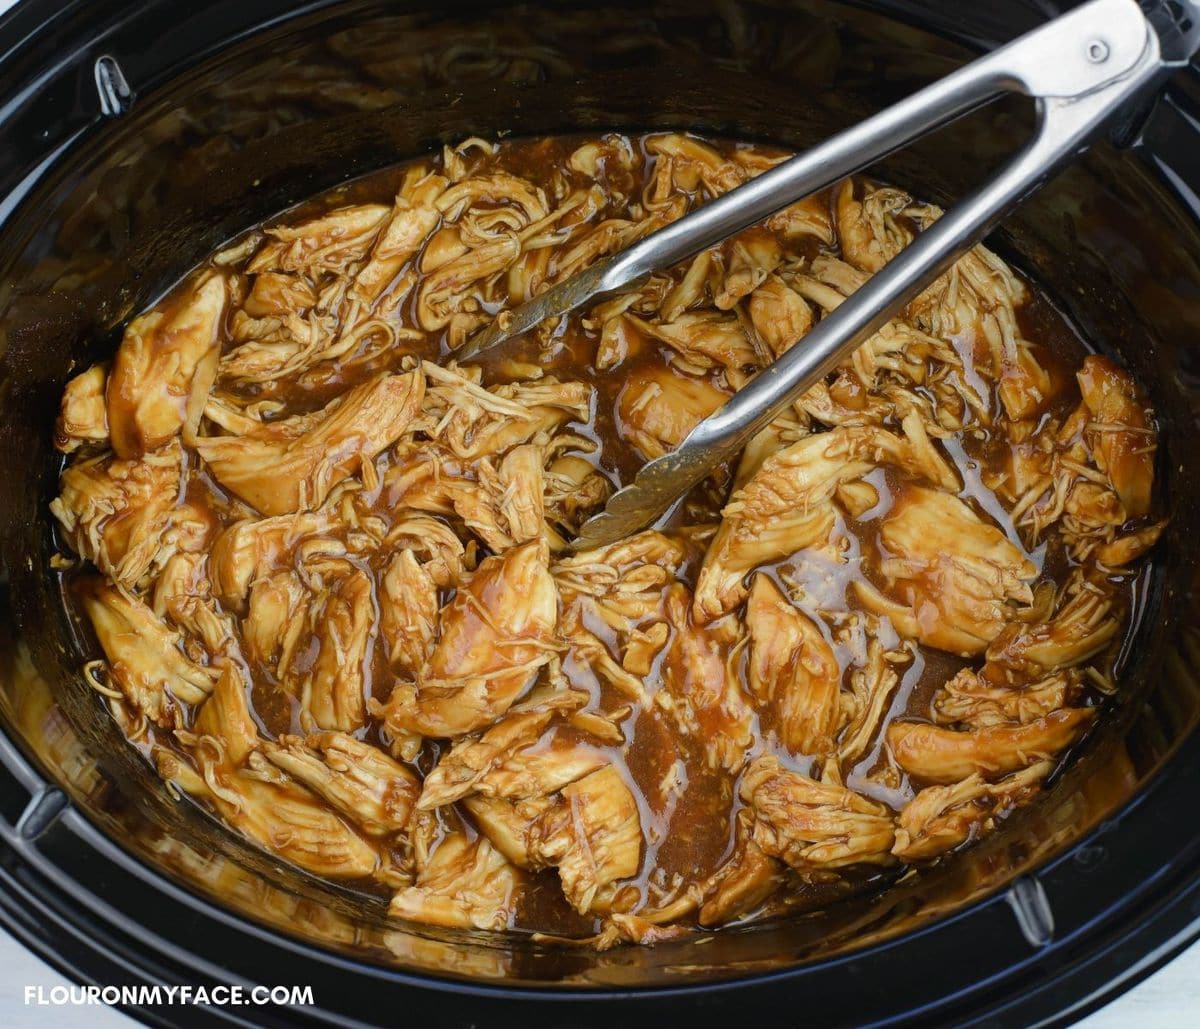 Shredded barbecued chicken in a crock pot.